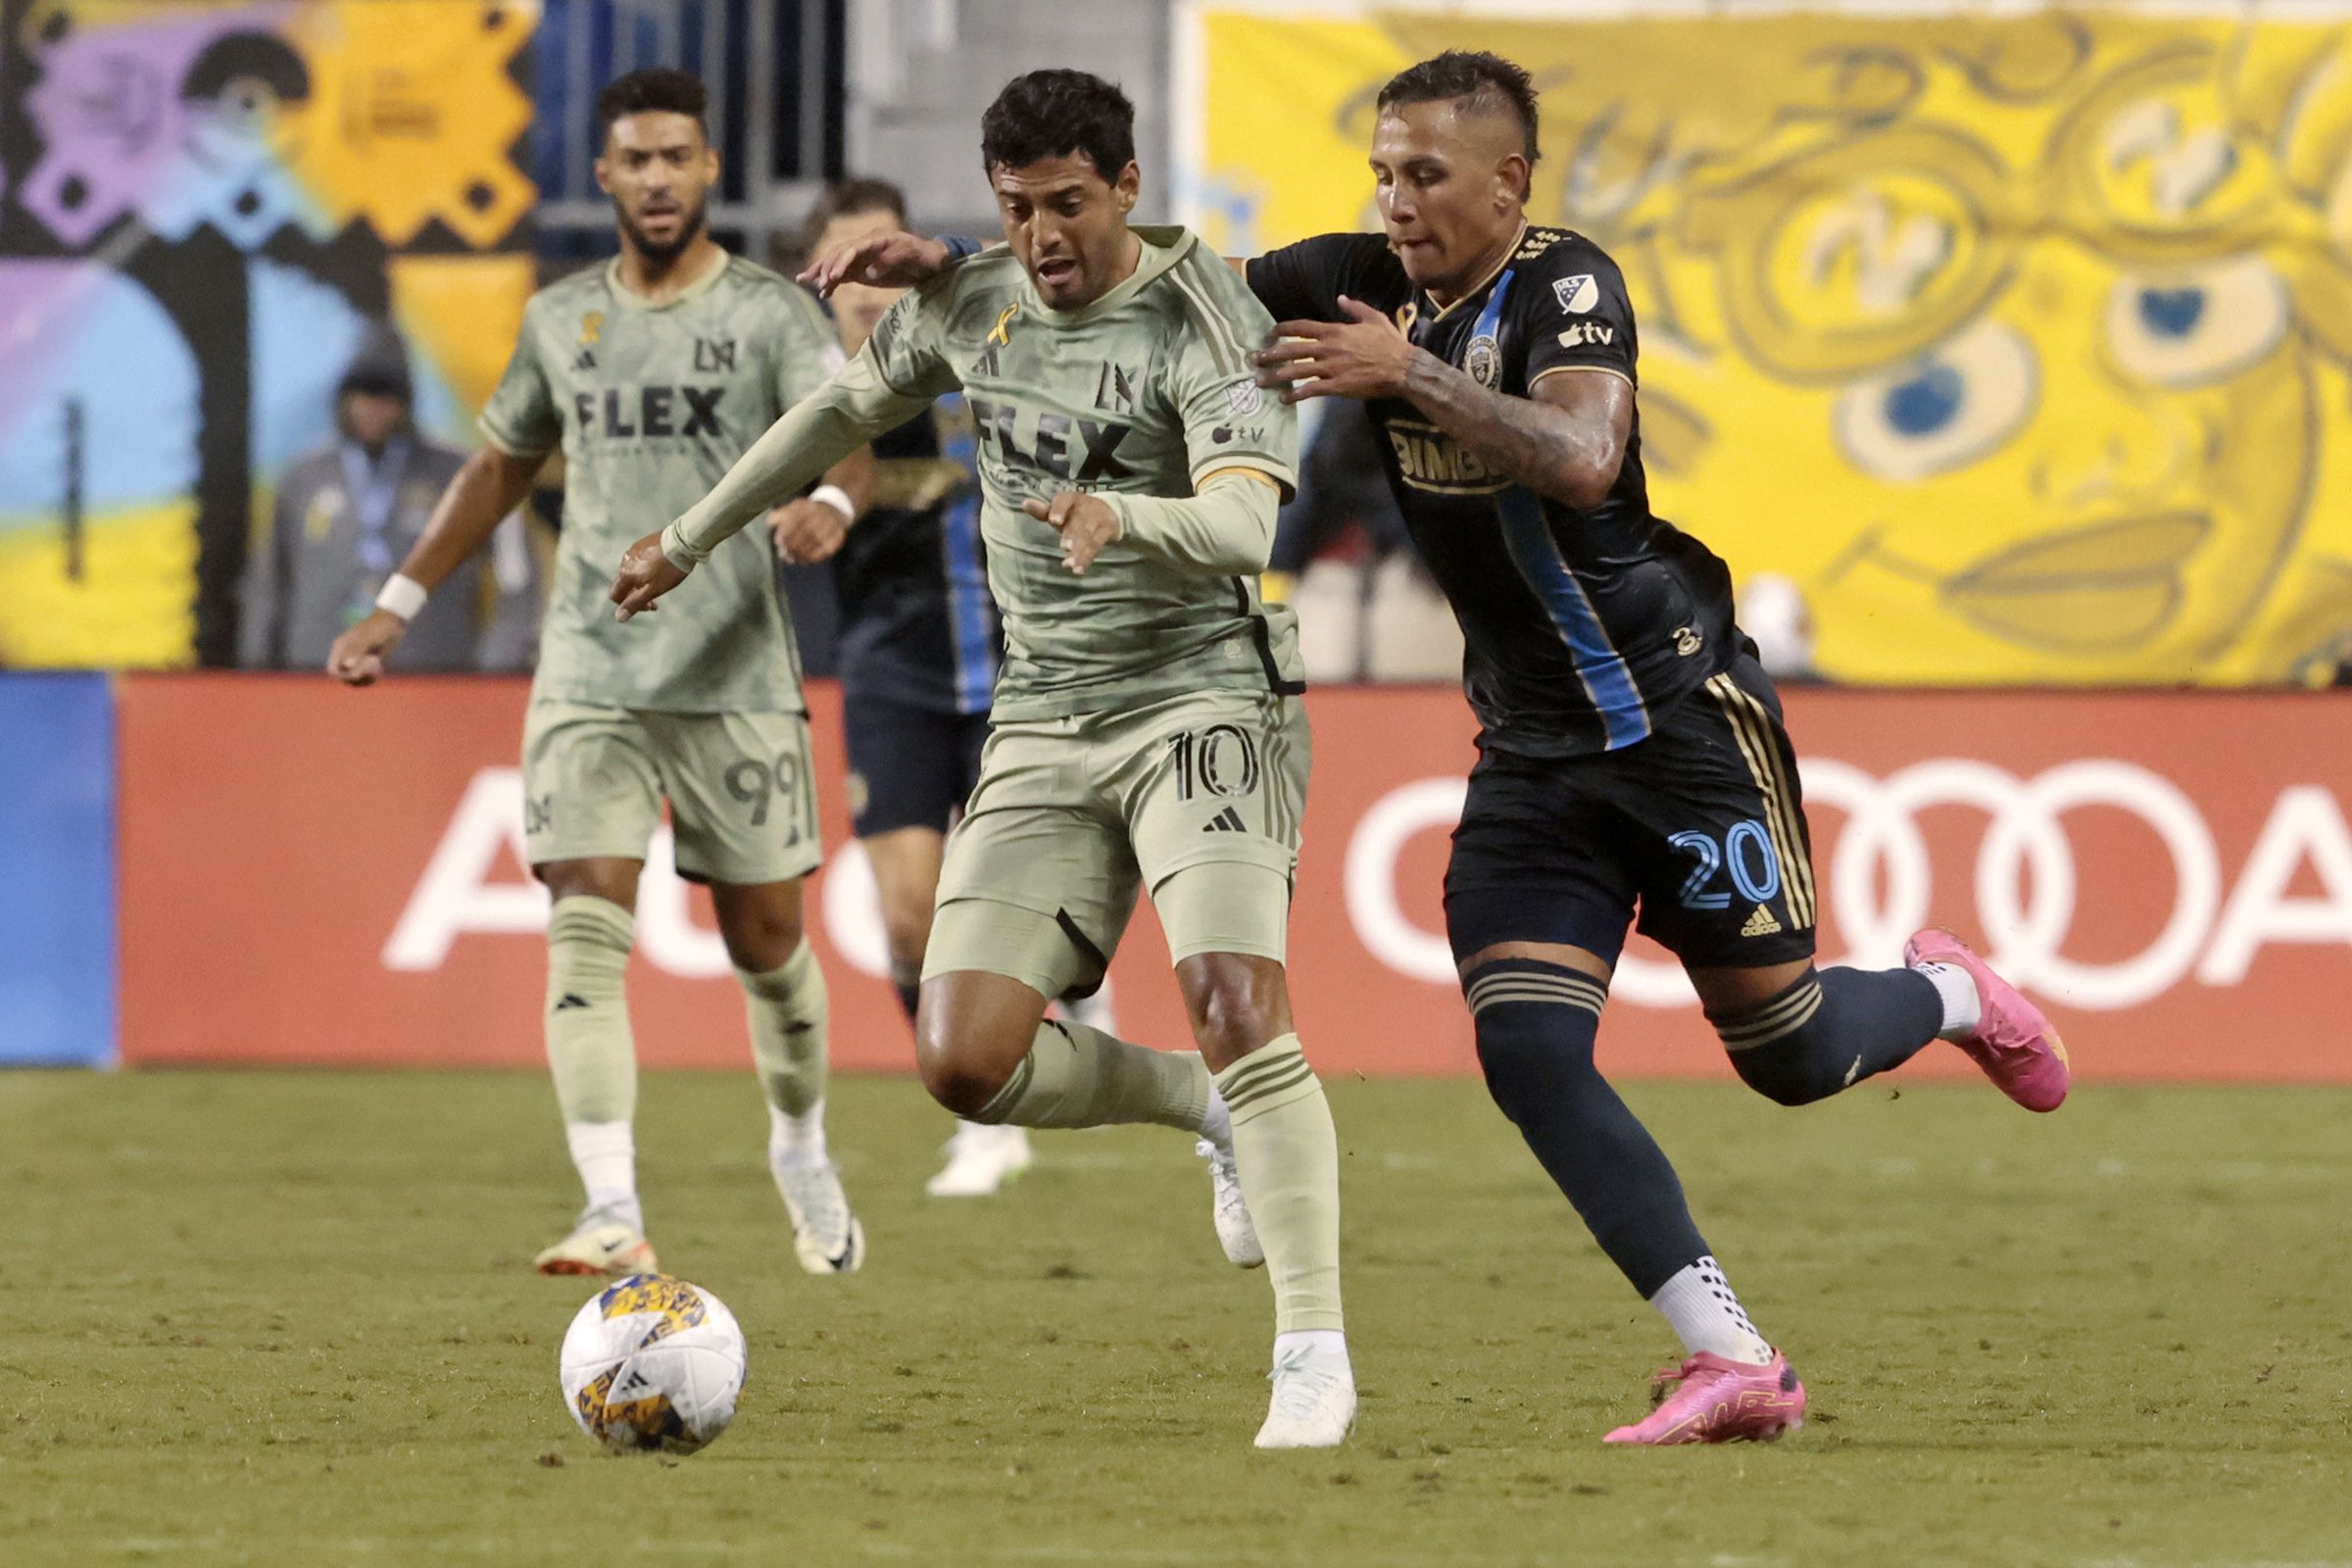 Jakob Glesnes' tap in helps Philadelphia Union tie the game against the New  York Red Bulls